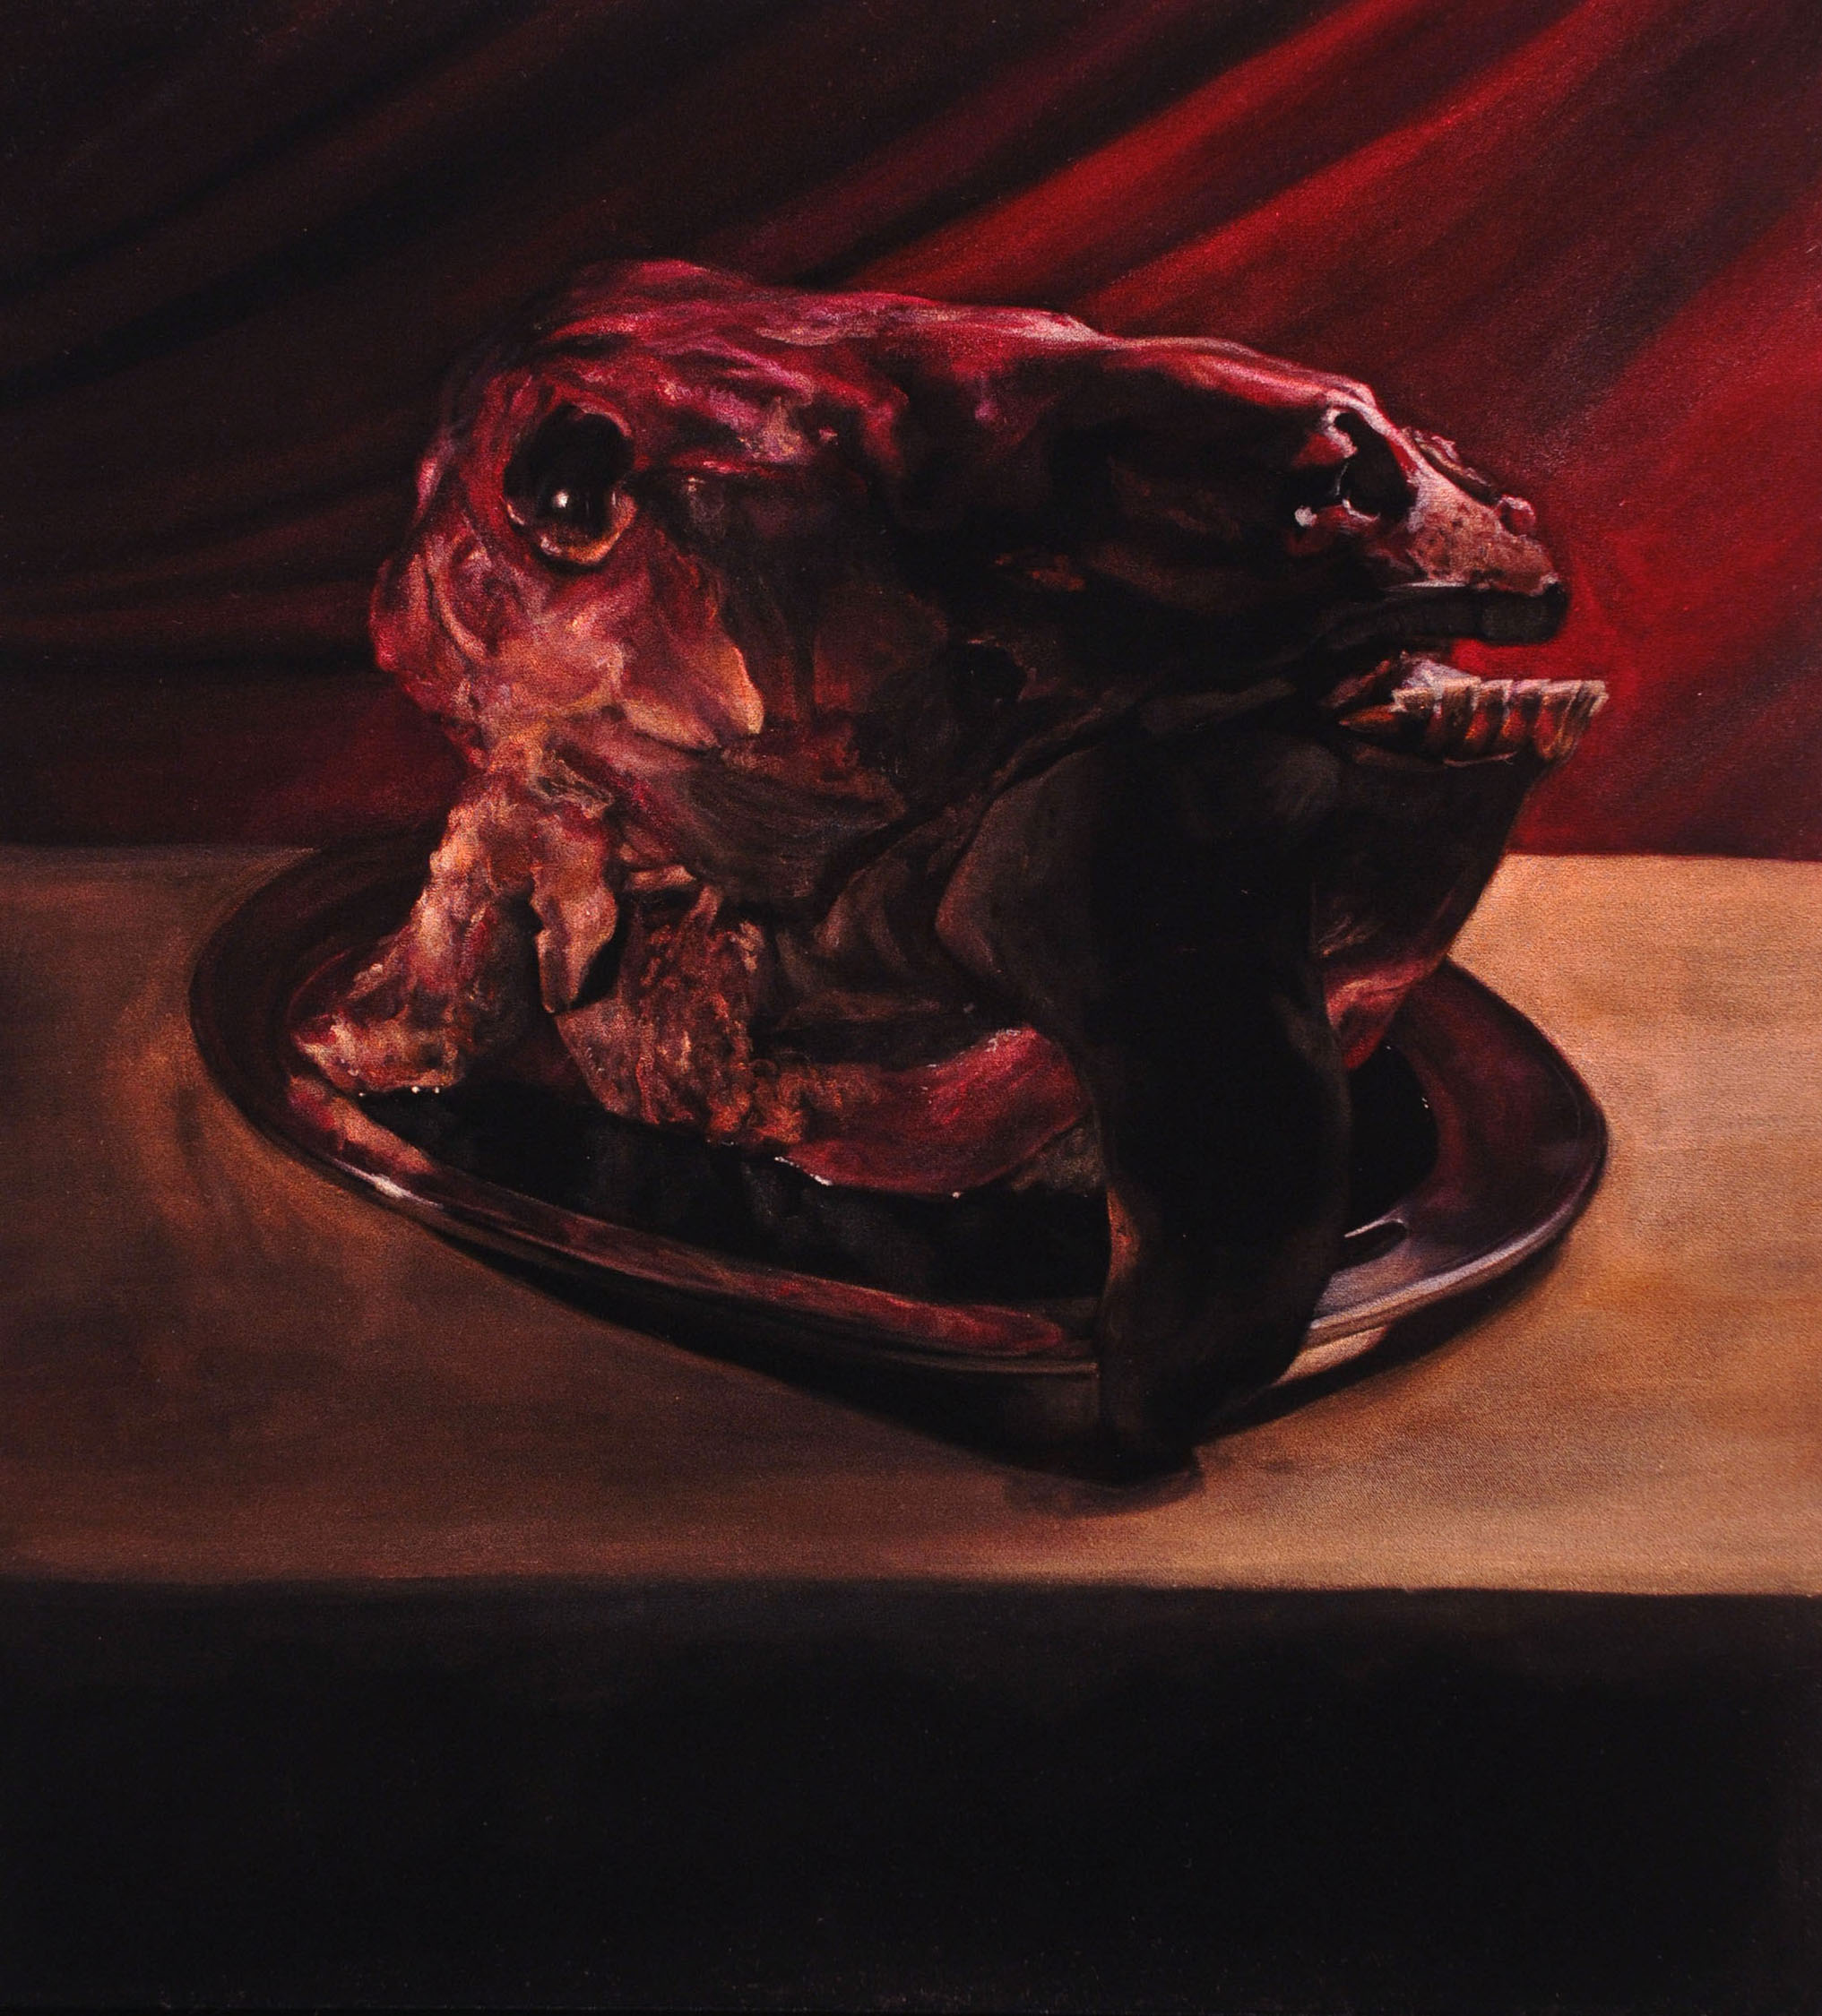  Beef Head with Tongue  acrylic on velvet  24 x 22 inches 